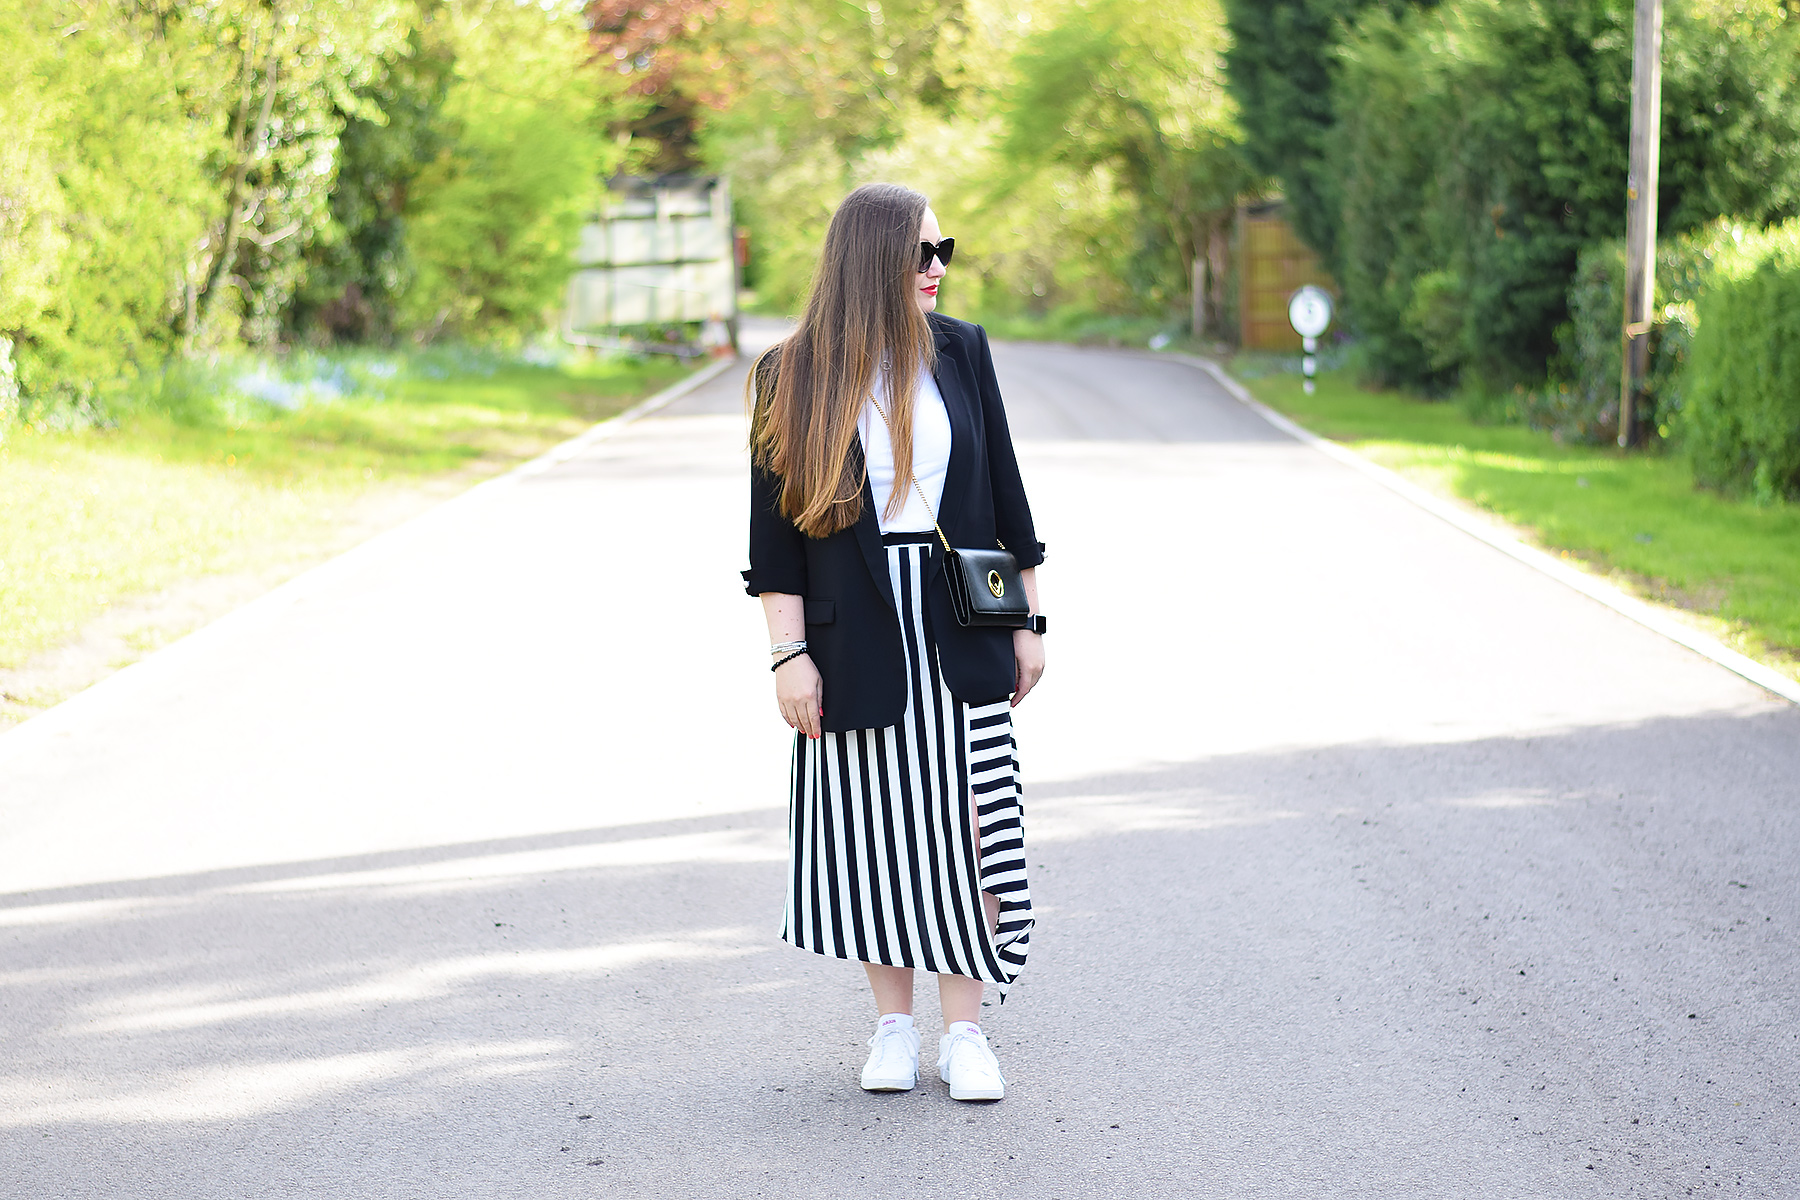 Black and white Skirt and blazer outfit